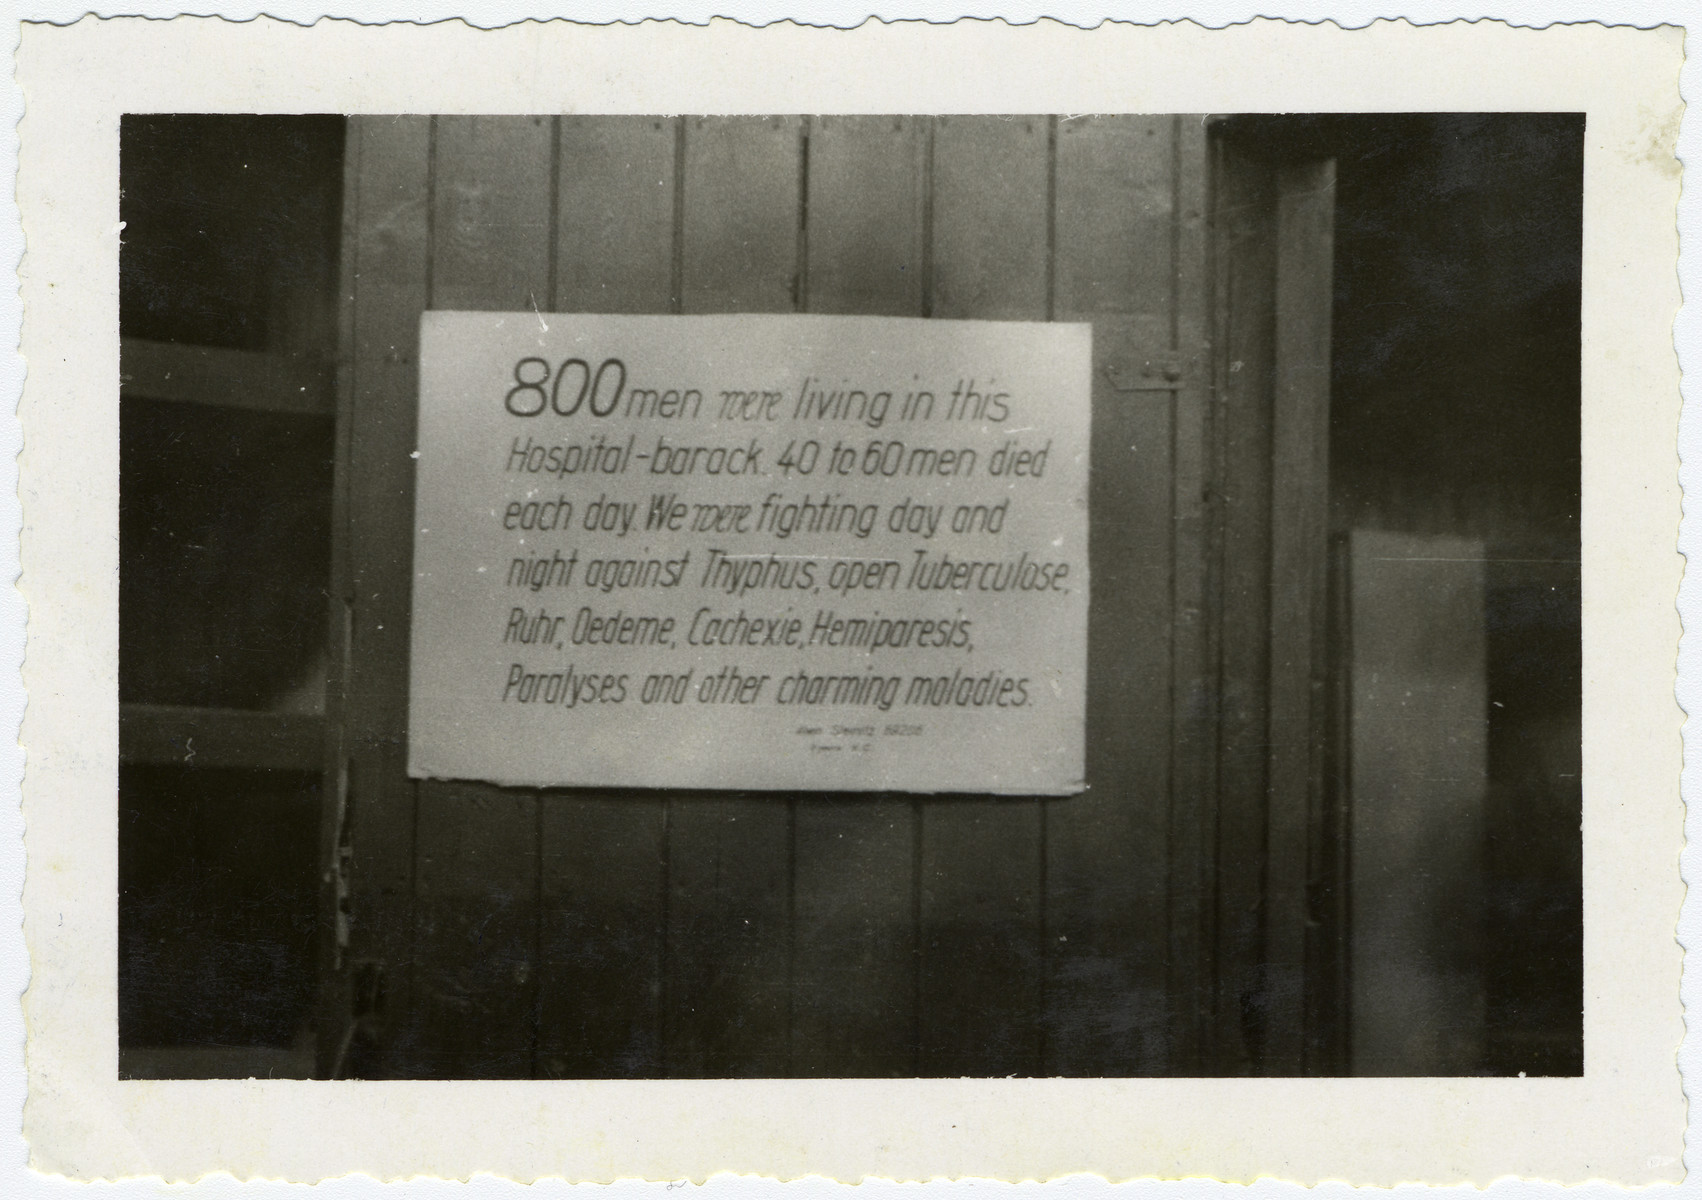 A sign on a the hospital barrack at Buchenwald honors the victims of disease and maltreatment.  

It reads, "800 men were livng in this Hospital-barrack.  40 to 60 men died each day.  We were fighting day and night against Typhus, open Tuberculase, Ruhr, Odeme, Cachexie, Hemiparesis, Paralyses and other charming maladies."